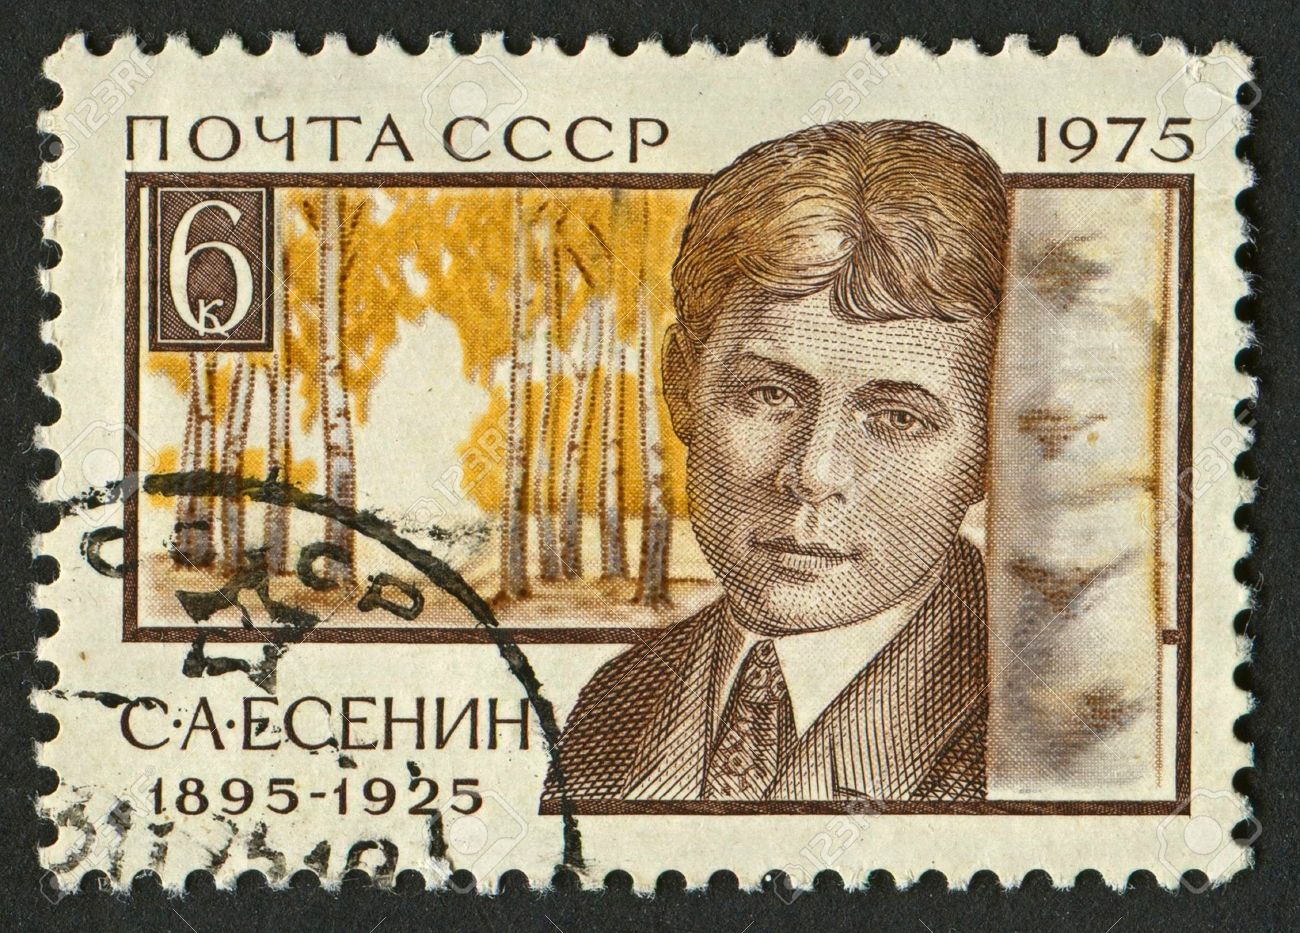 17863266 USSR CIRCA 1975 Postage stamps printed in USSR dedicated to Sergei Alexandrovich Yesenin 1895 1925 R Stock Photo